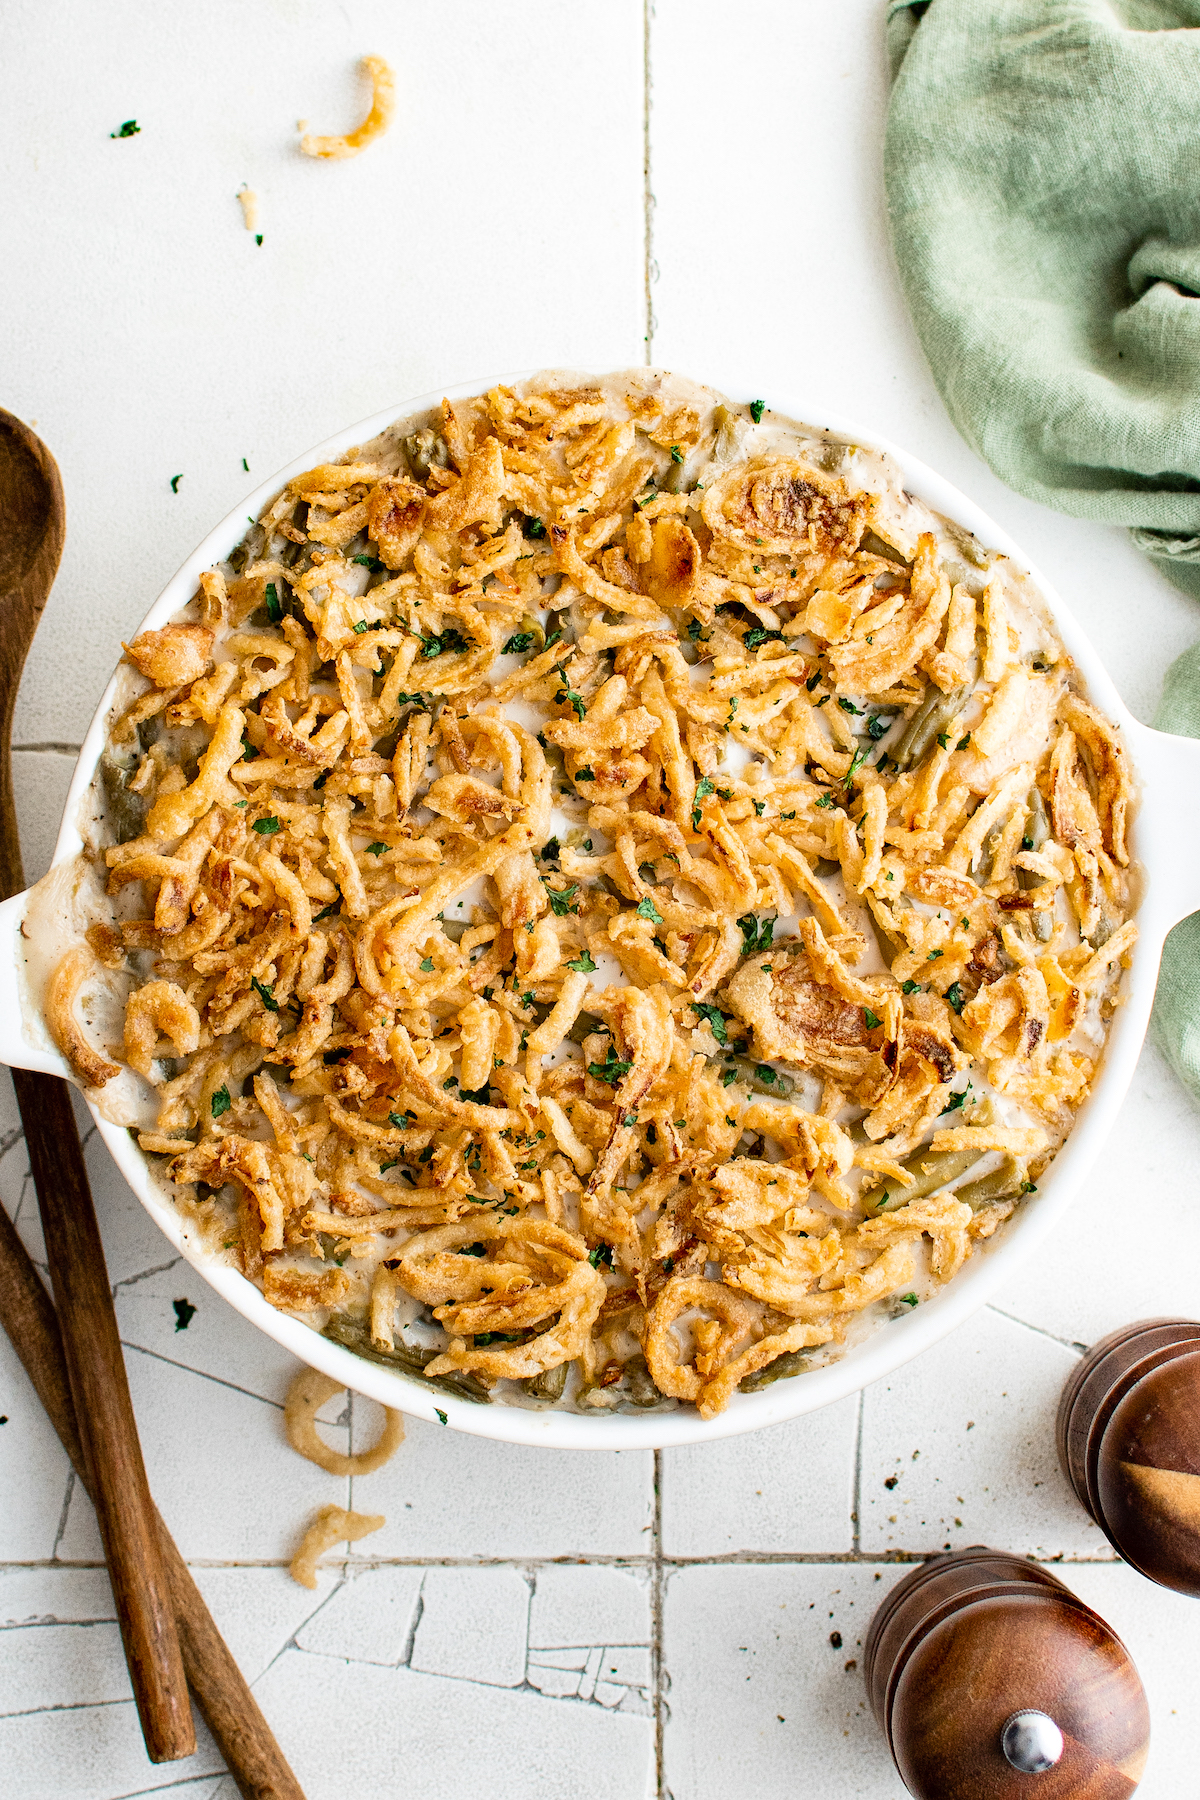 Green bean casserole with french fried onions on top.